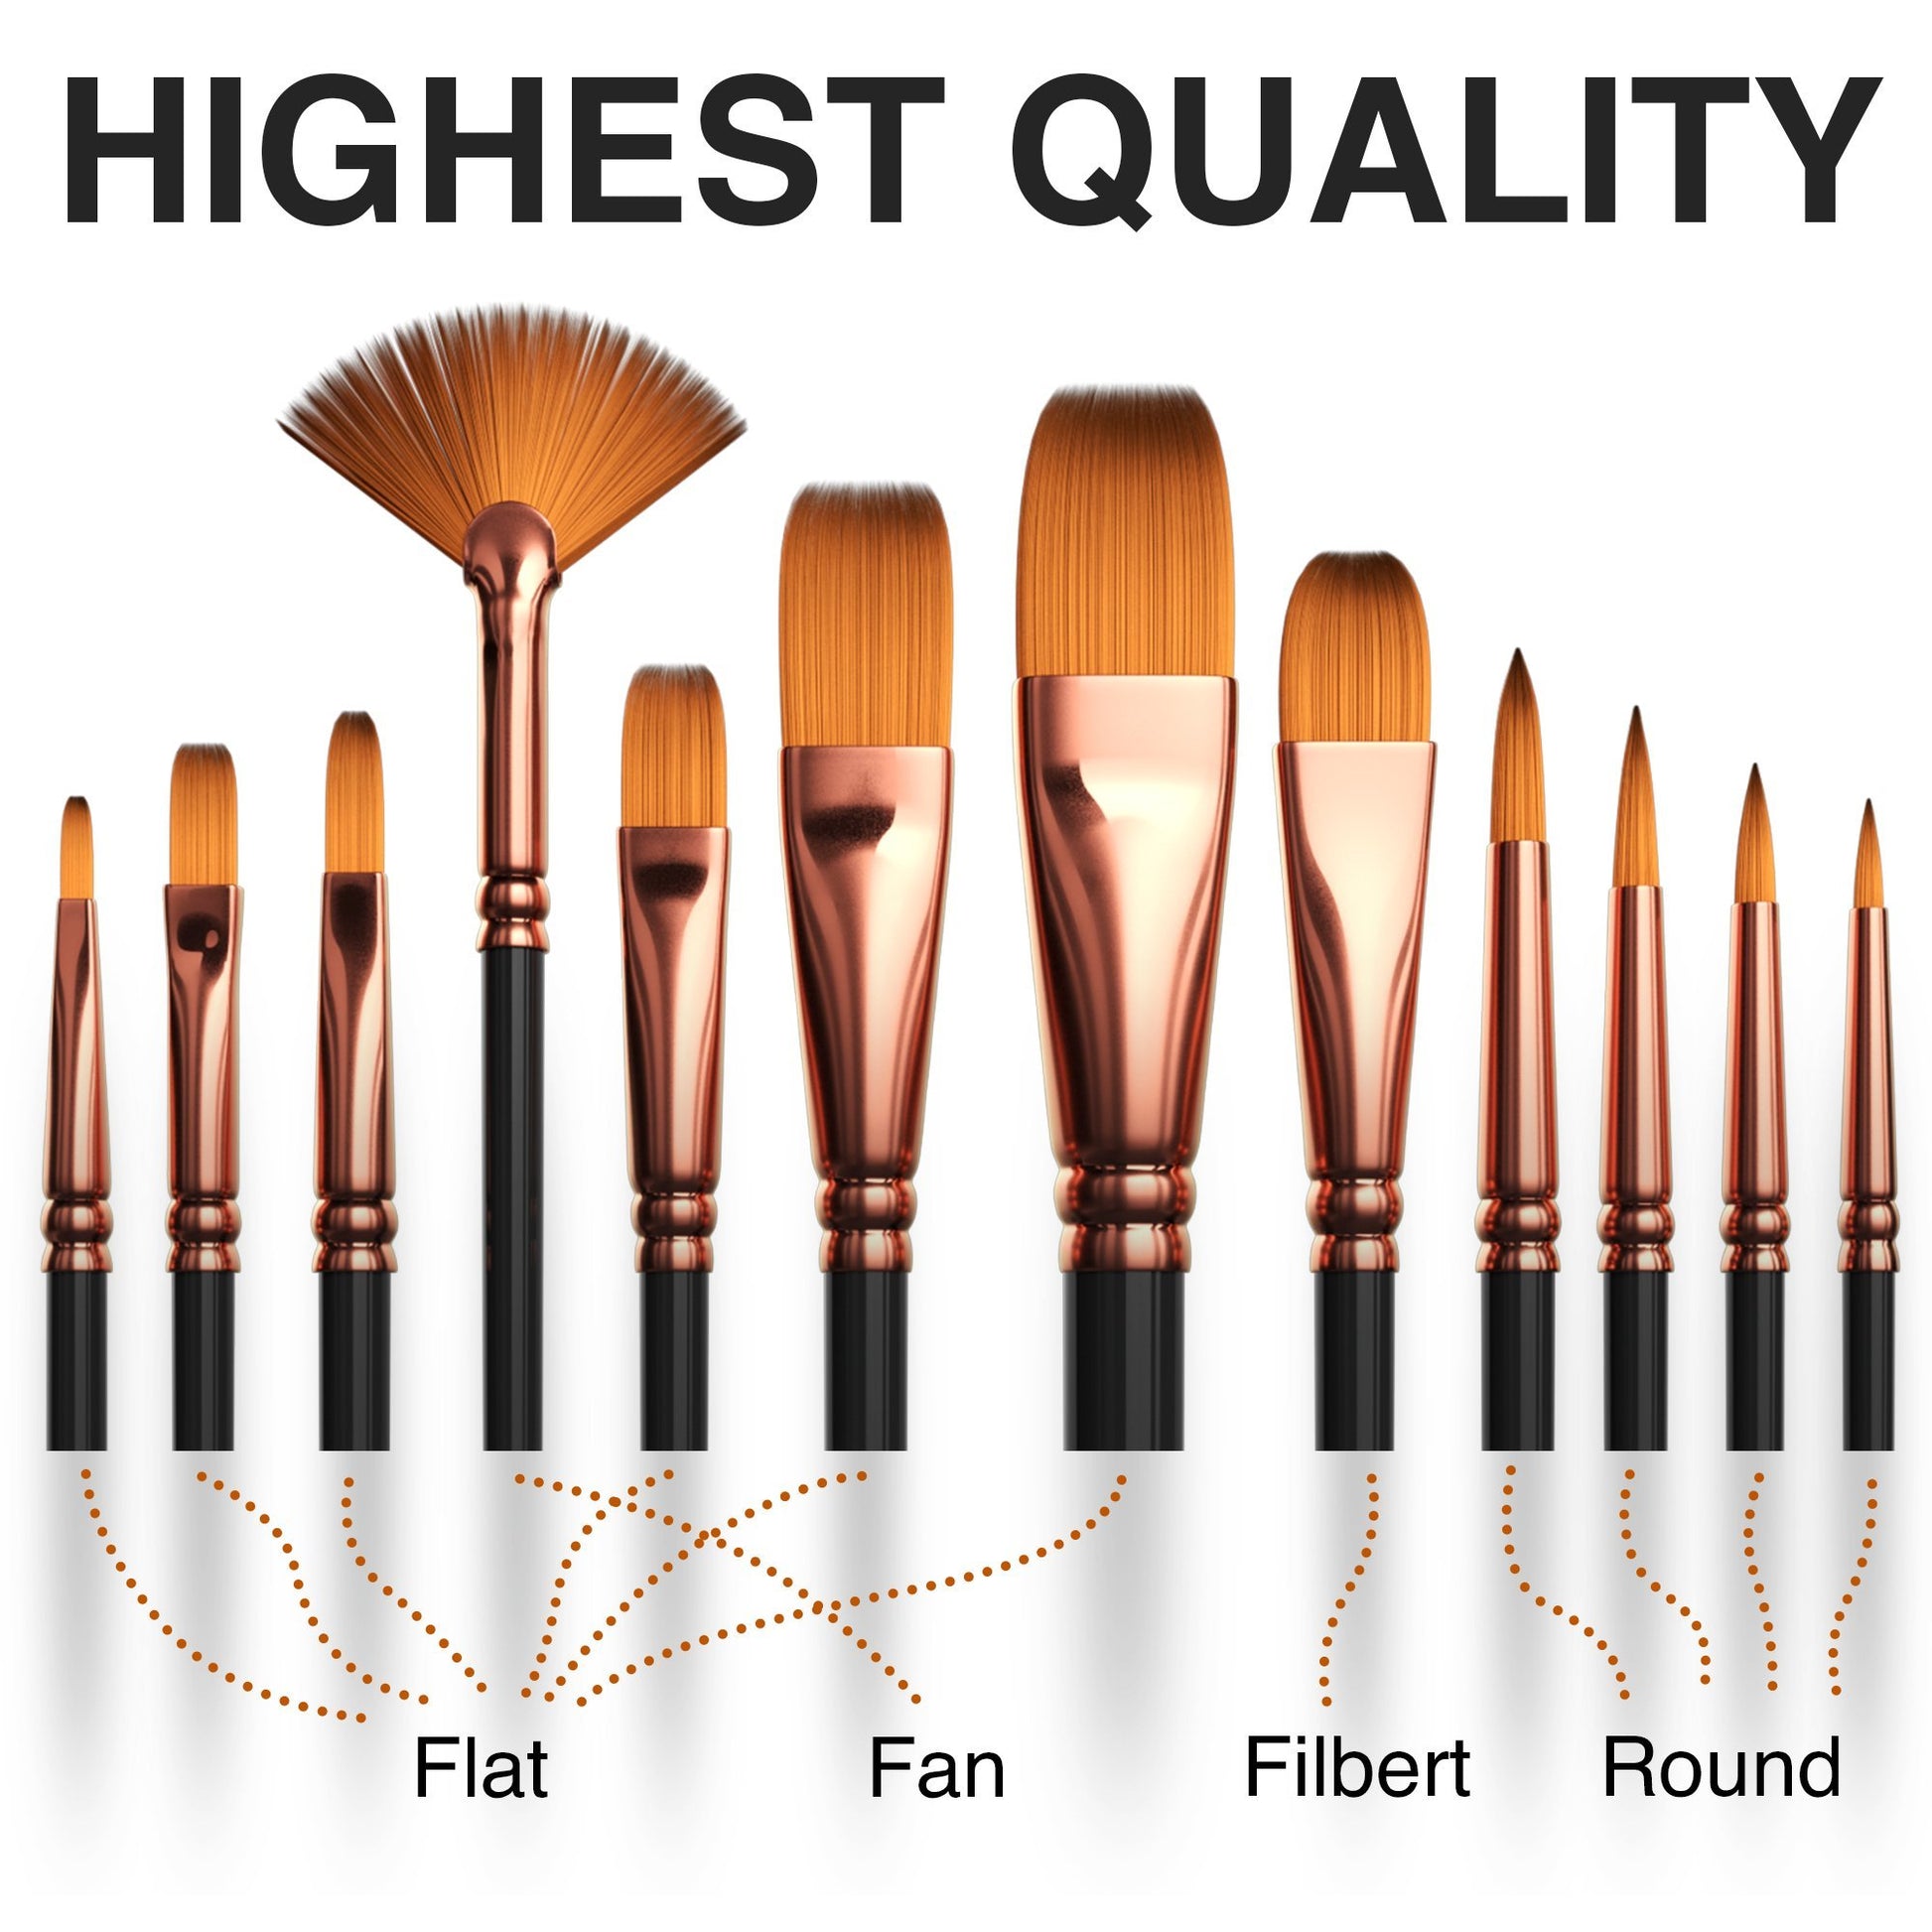 Professional Artist Paint Brush Set of 40 with Storage Case - Includes Round and Flat Art Brushes with Hog, Pony, and Nylon Hair Bristles - Perfect